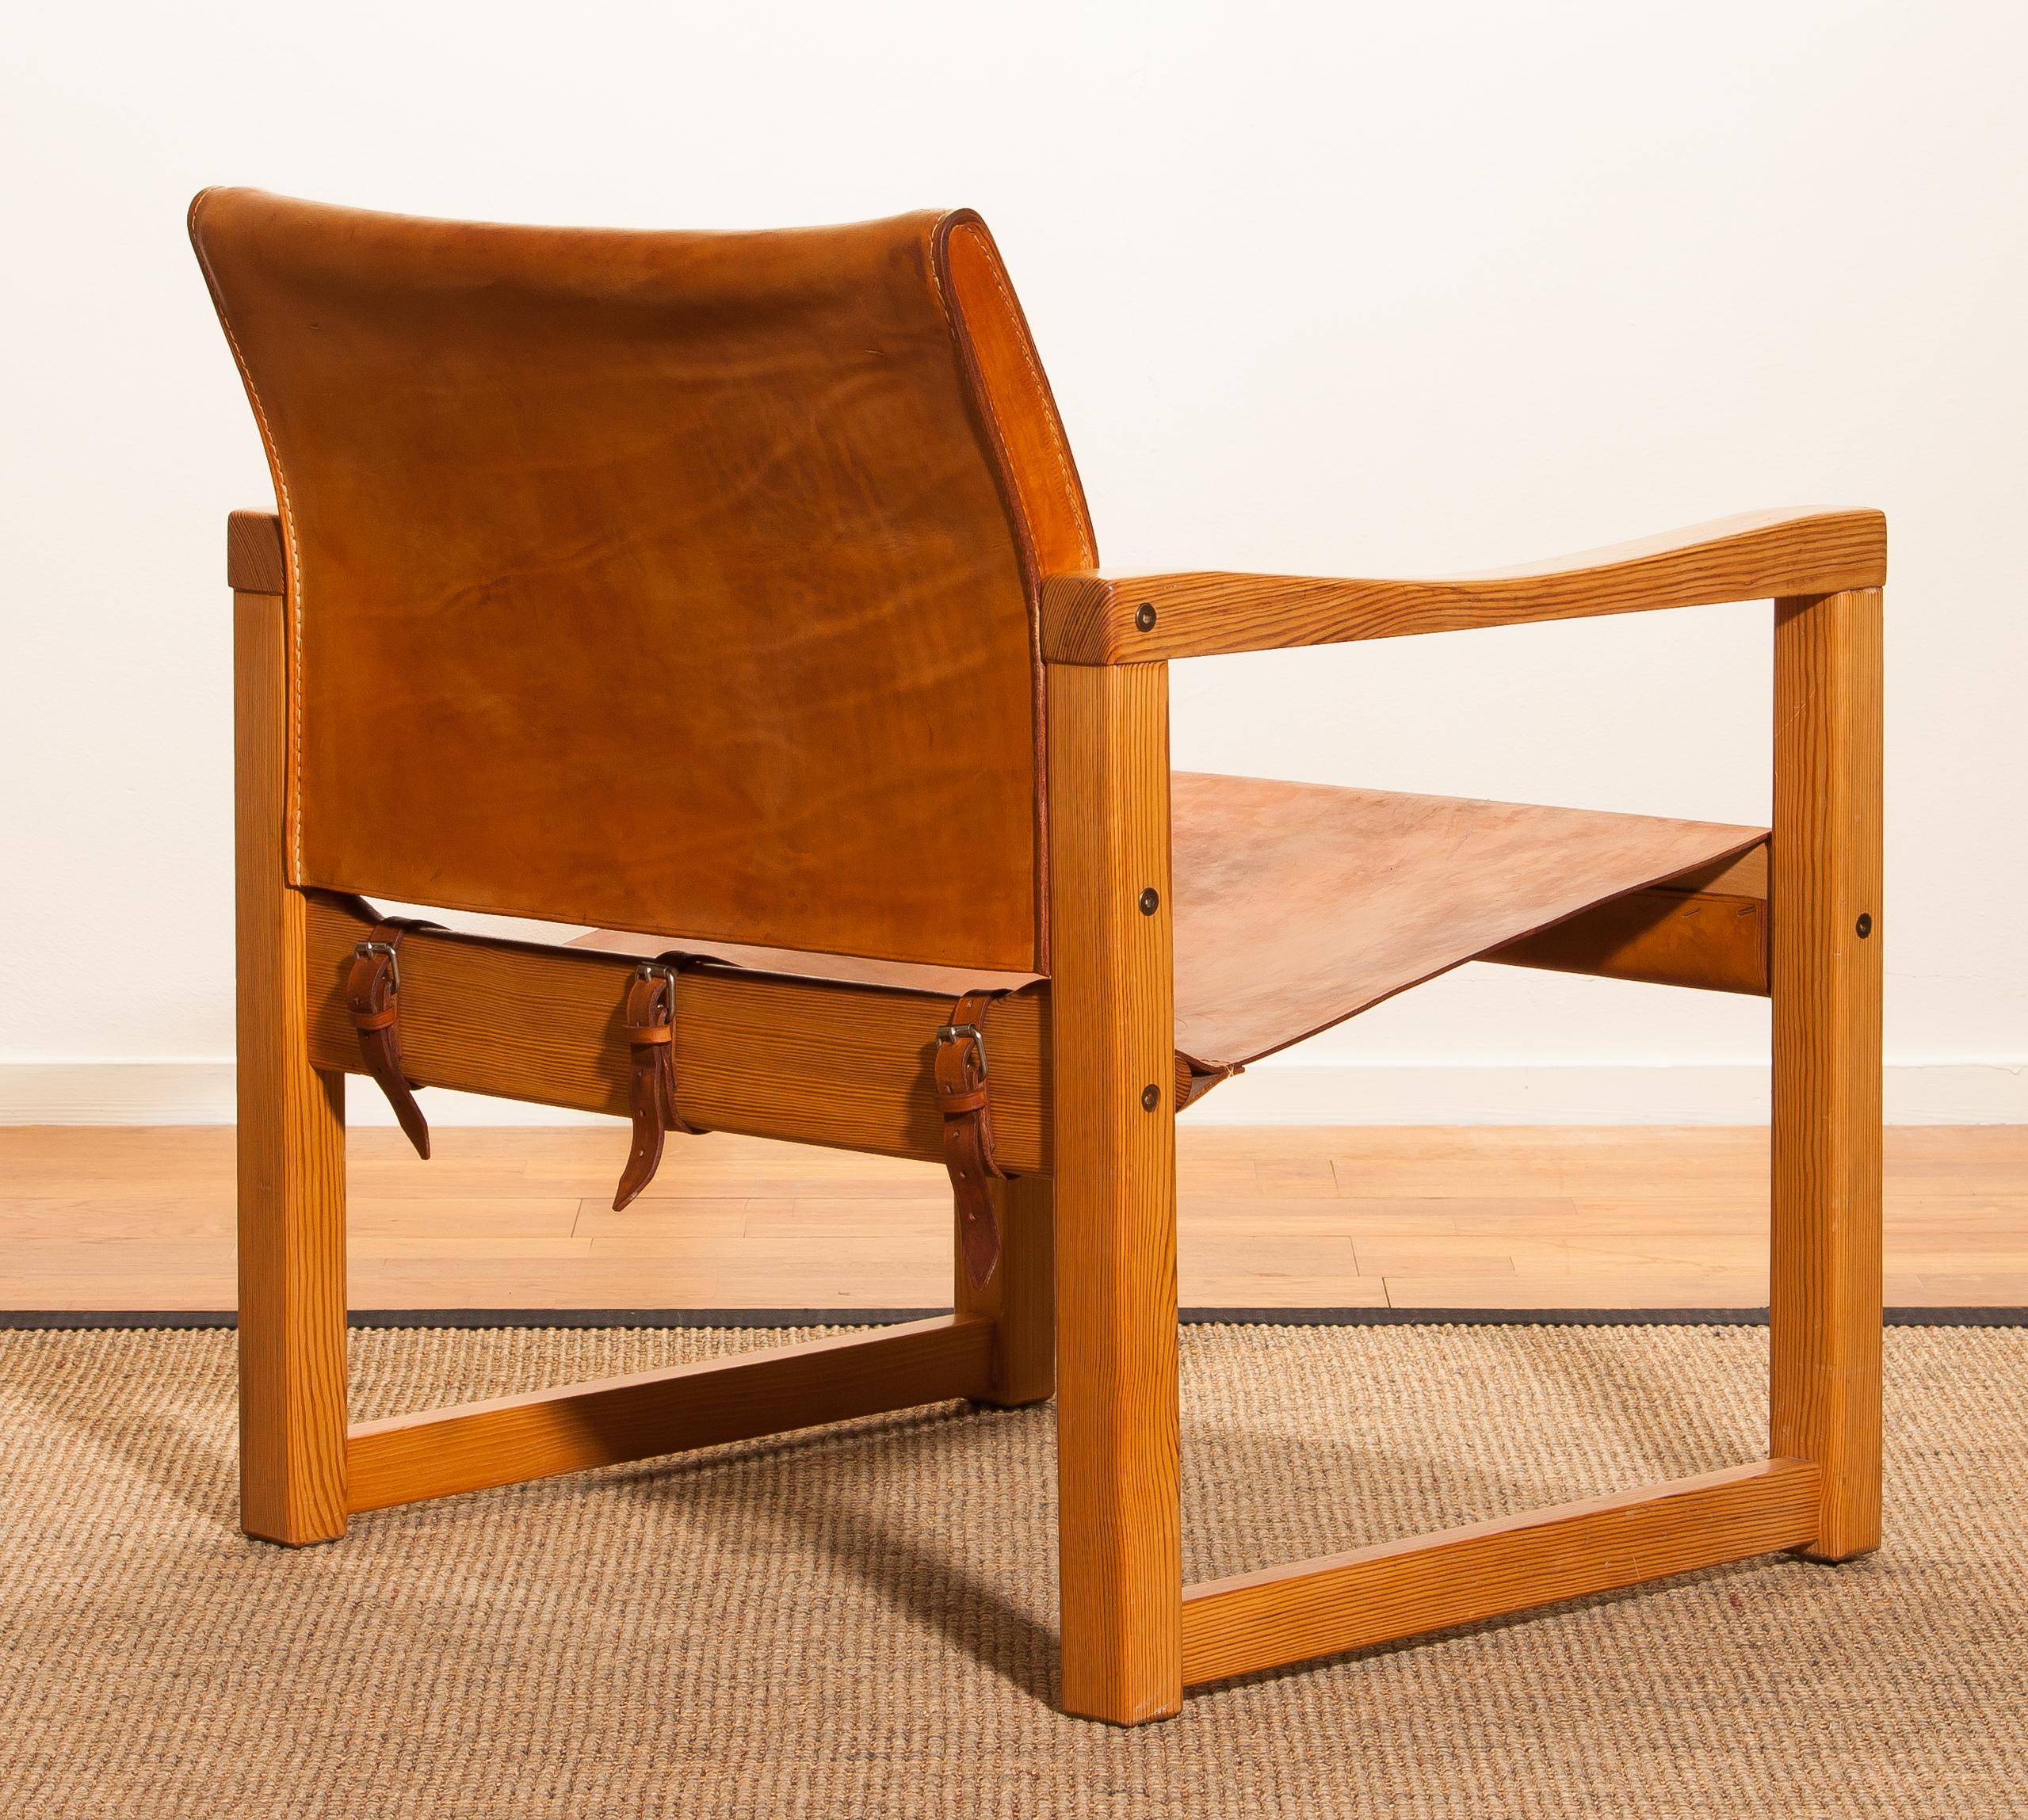 This elegant leather “Safari” chair designed by the Swedish designer Karin Mobring and produced in the 1970s. 
The chair's frame is made of pine. 
The seating/backrest and belts are made of very thick and sturdy cognac leather and in very good